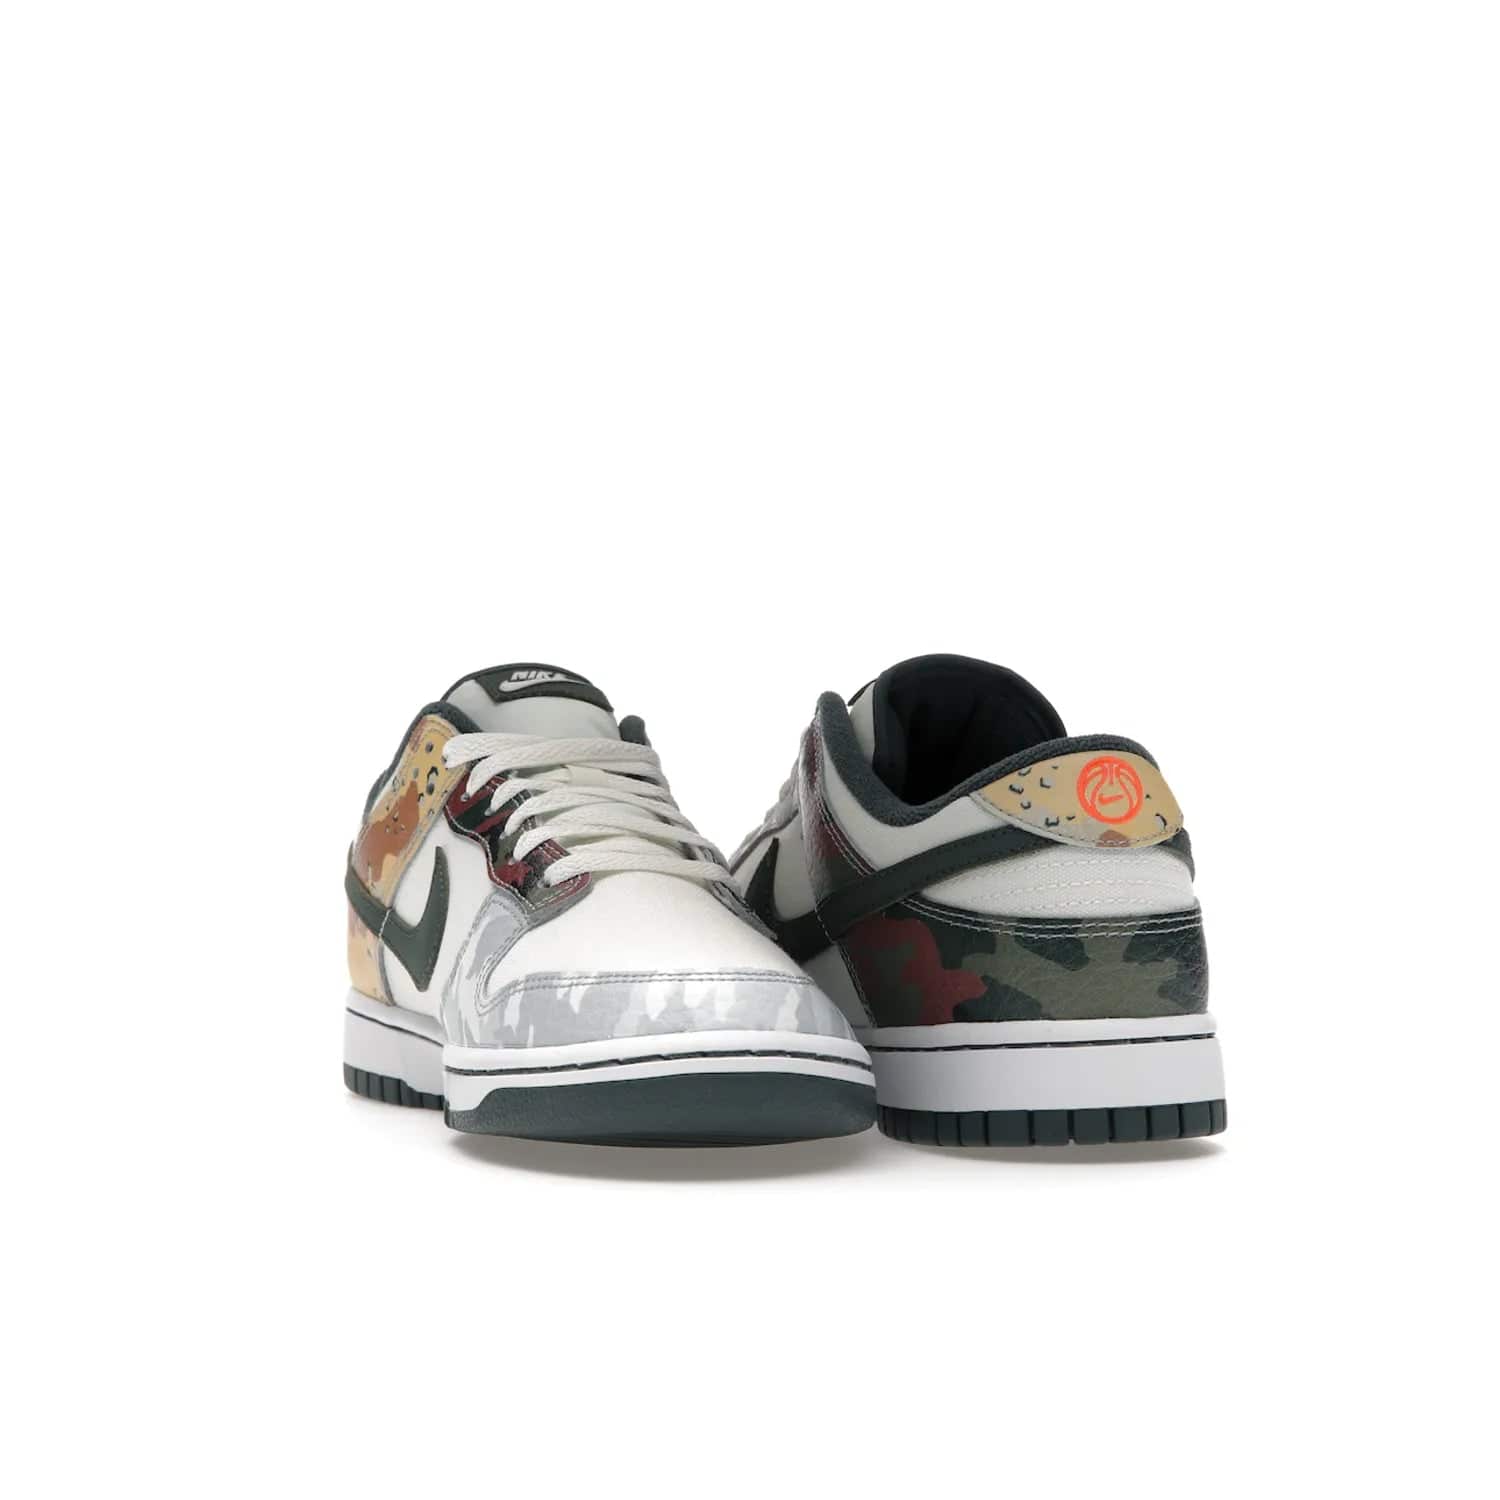 Nike Dunk Low SE Sail Multi-Camo - Image 26 - Only at www.BallersClubKickz.com - Classic design meets statement style in the Nike Dunk Low SE Sail Multi-Camo. White leather base with multi-color camo overlays, vibrant Nike Swooshes, and orange Nike embroidery. Get yours August 2021.